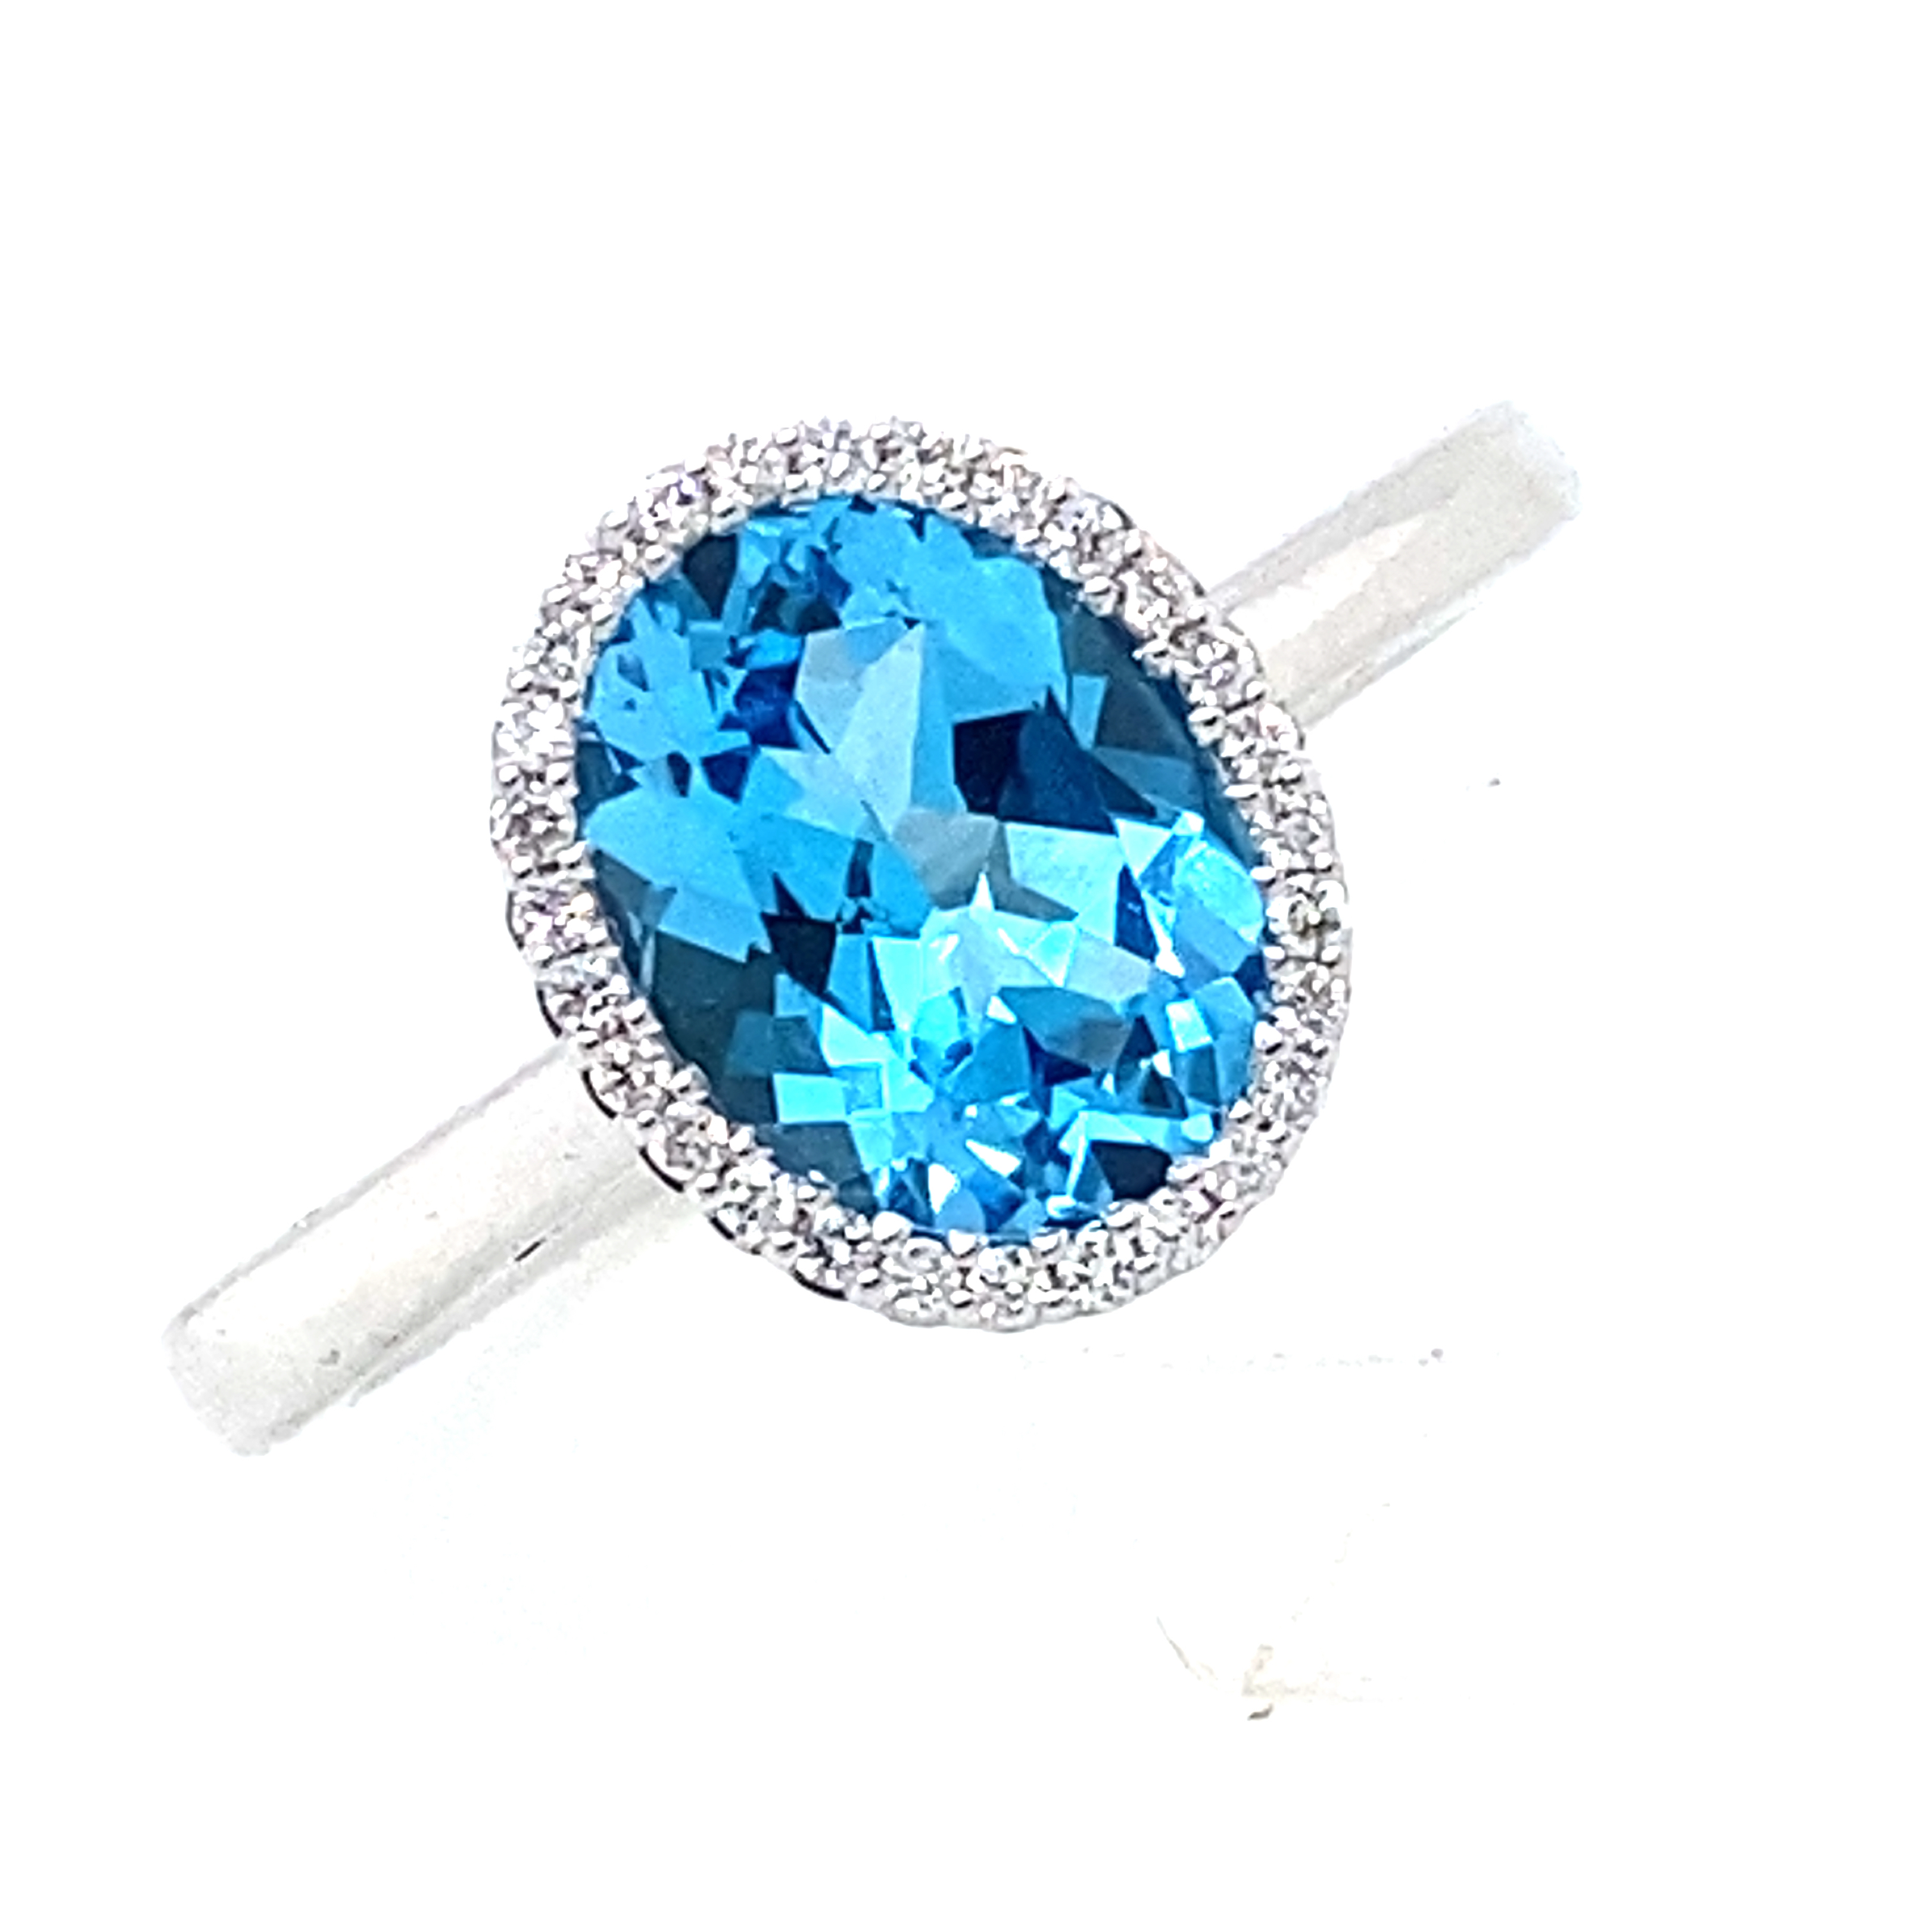 Blue Topaz and Diamond Ring in 18 Carat White Gold